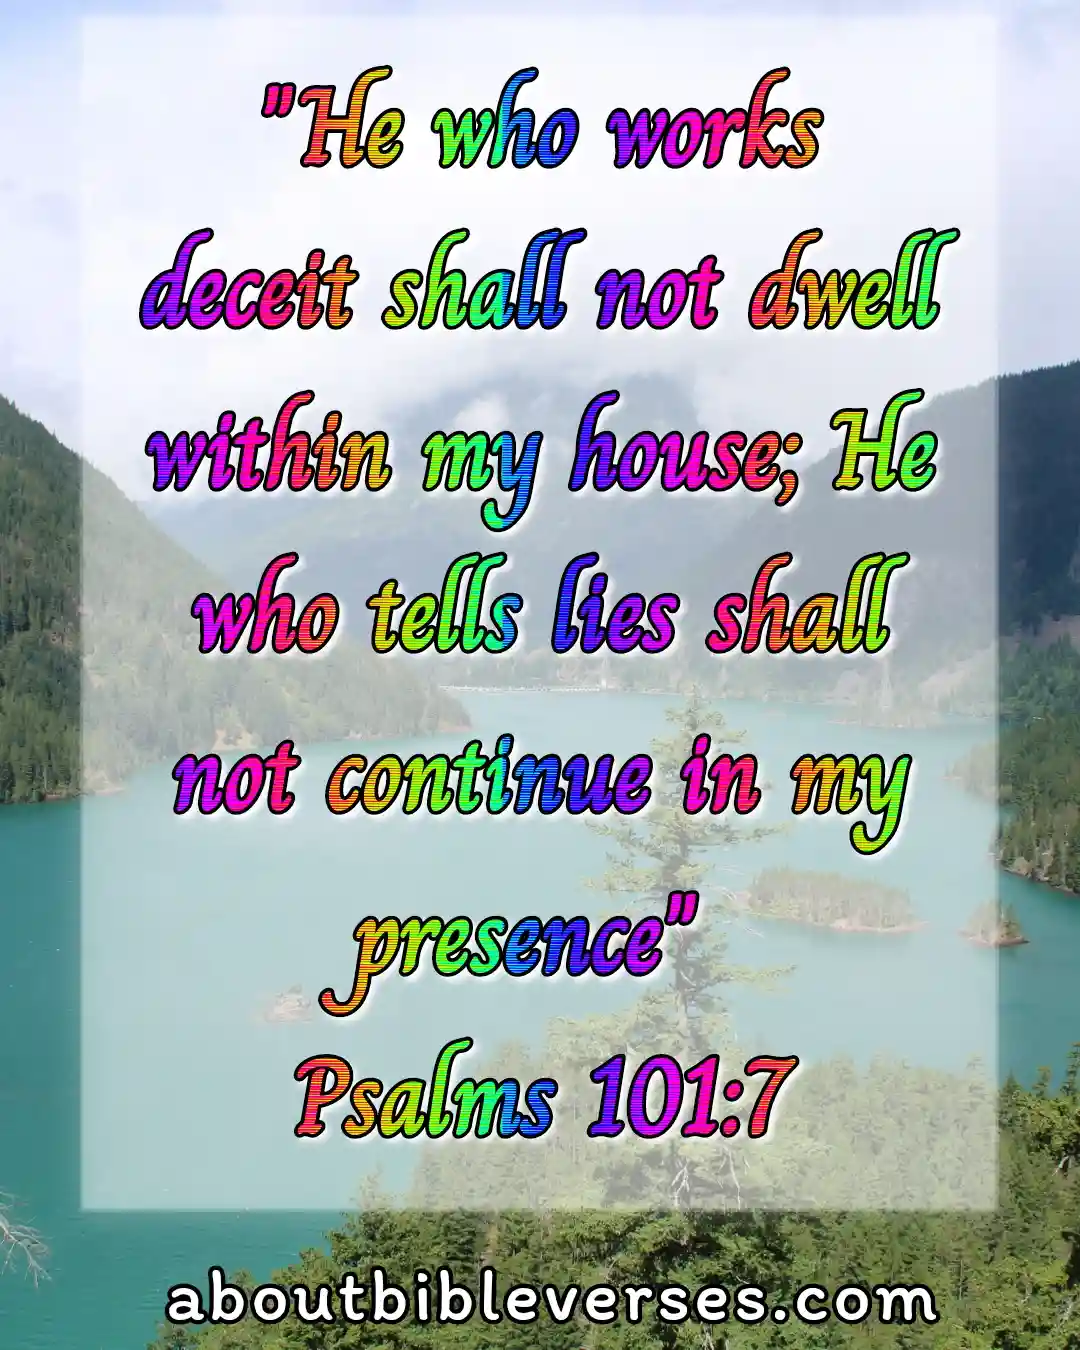 today bible verse (Psalm 101:7)